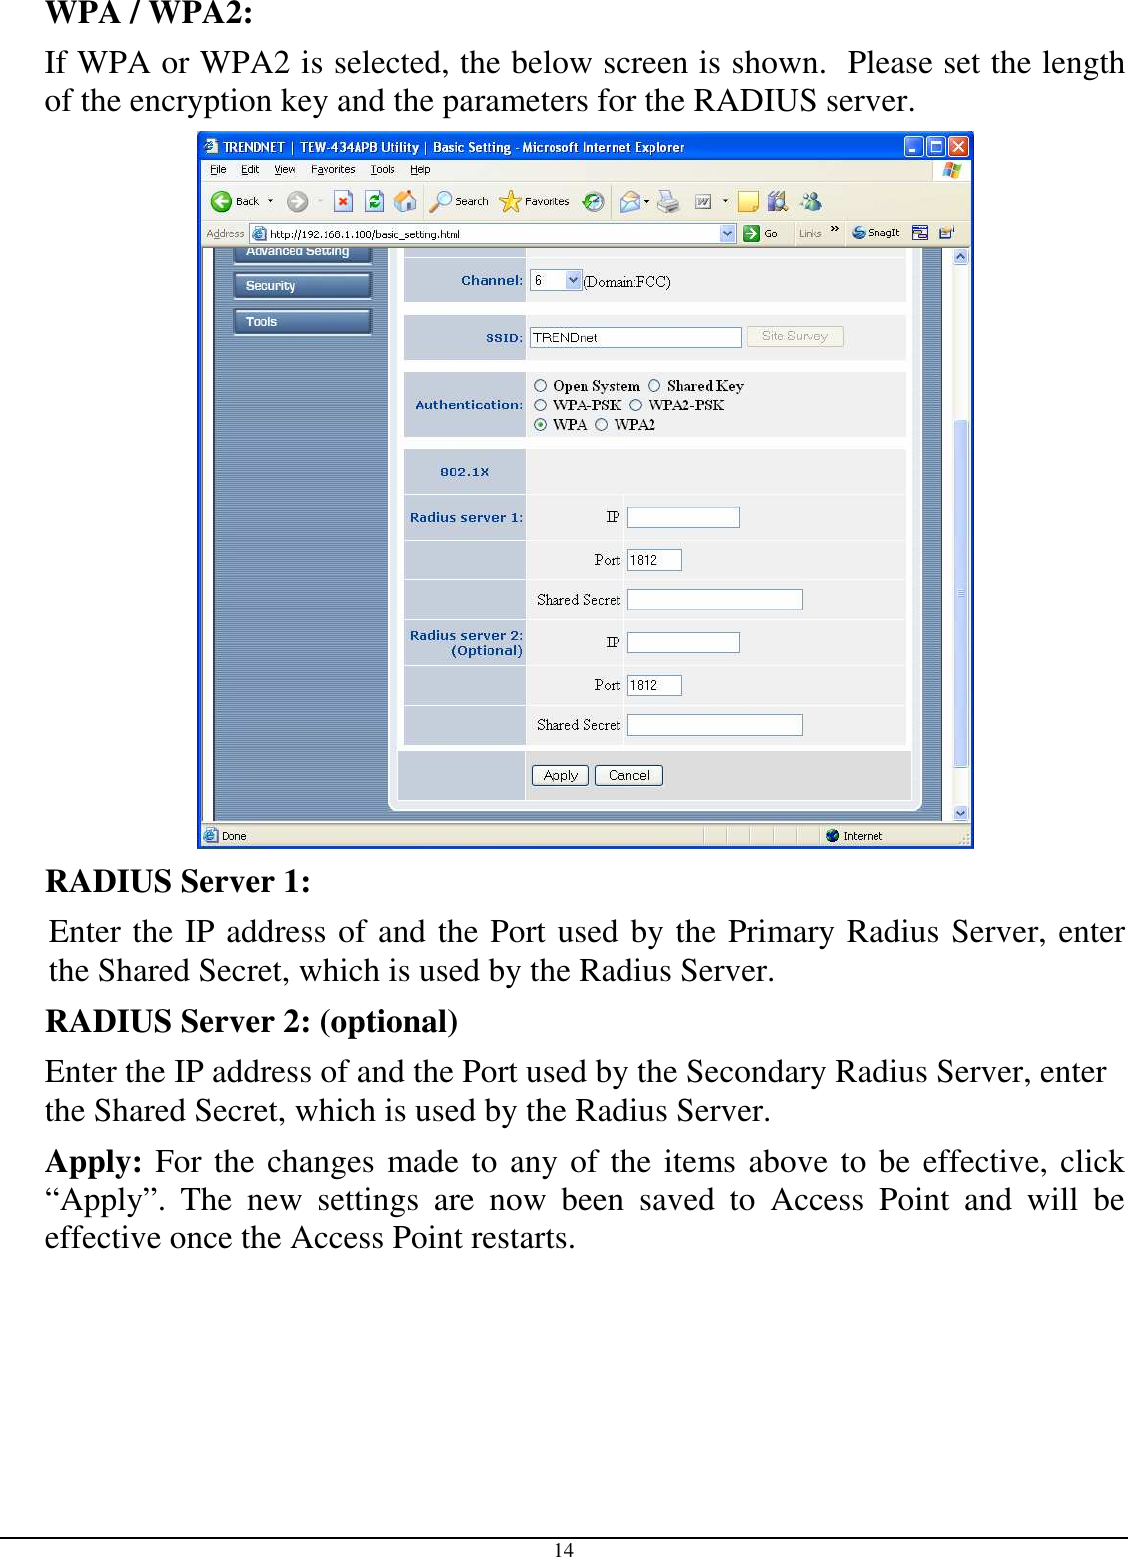  14 WPA / WPA2:  If WPA or WPA2 is selected, the below screen is shown.  Please set the length of the encryption key and the parameters for the RADIUS server.  RADIUS Server 1:  Enter the IP address of and the Port used by the Primary Radius Server, enter the Shared Secret, which is used by the Radius Server. RADIUS Server 2: (optional) Enter the IP address of and the Port used by the Secondary Radius Server, enter the Shared Secret, which is used by the Radius Server.  Apply: For the changes made to any of the items above to be effective, click “Apply”.  The  new  settings  are  now  been  saved  to  Access  Point  and  will  be effective once the Access Point restarts. 